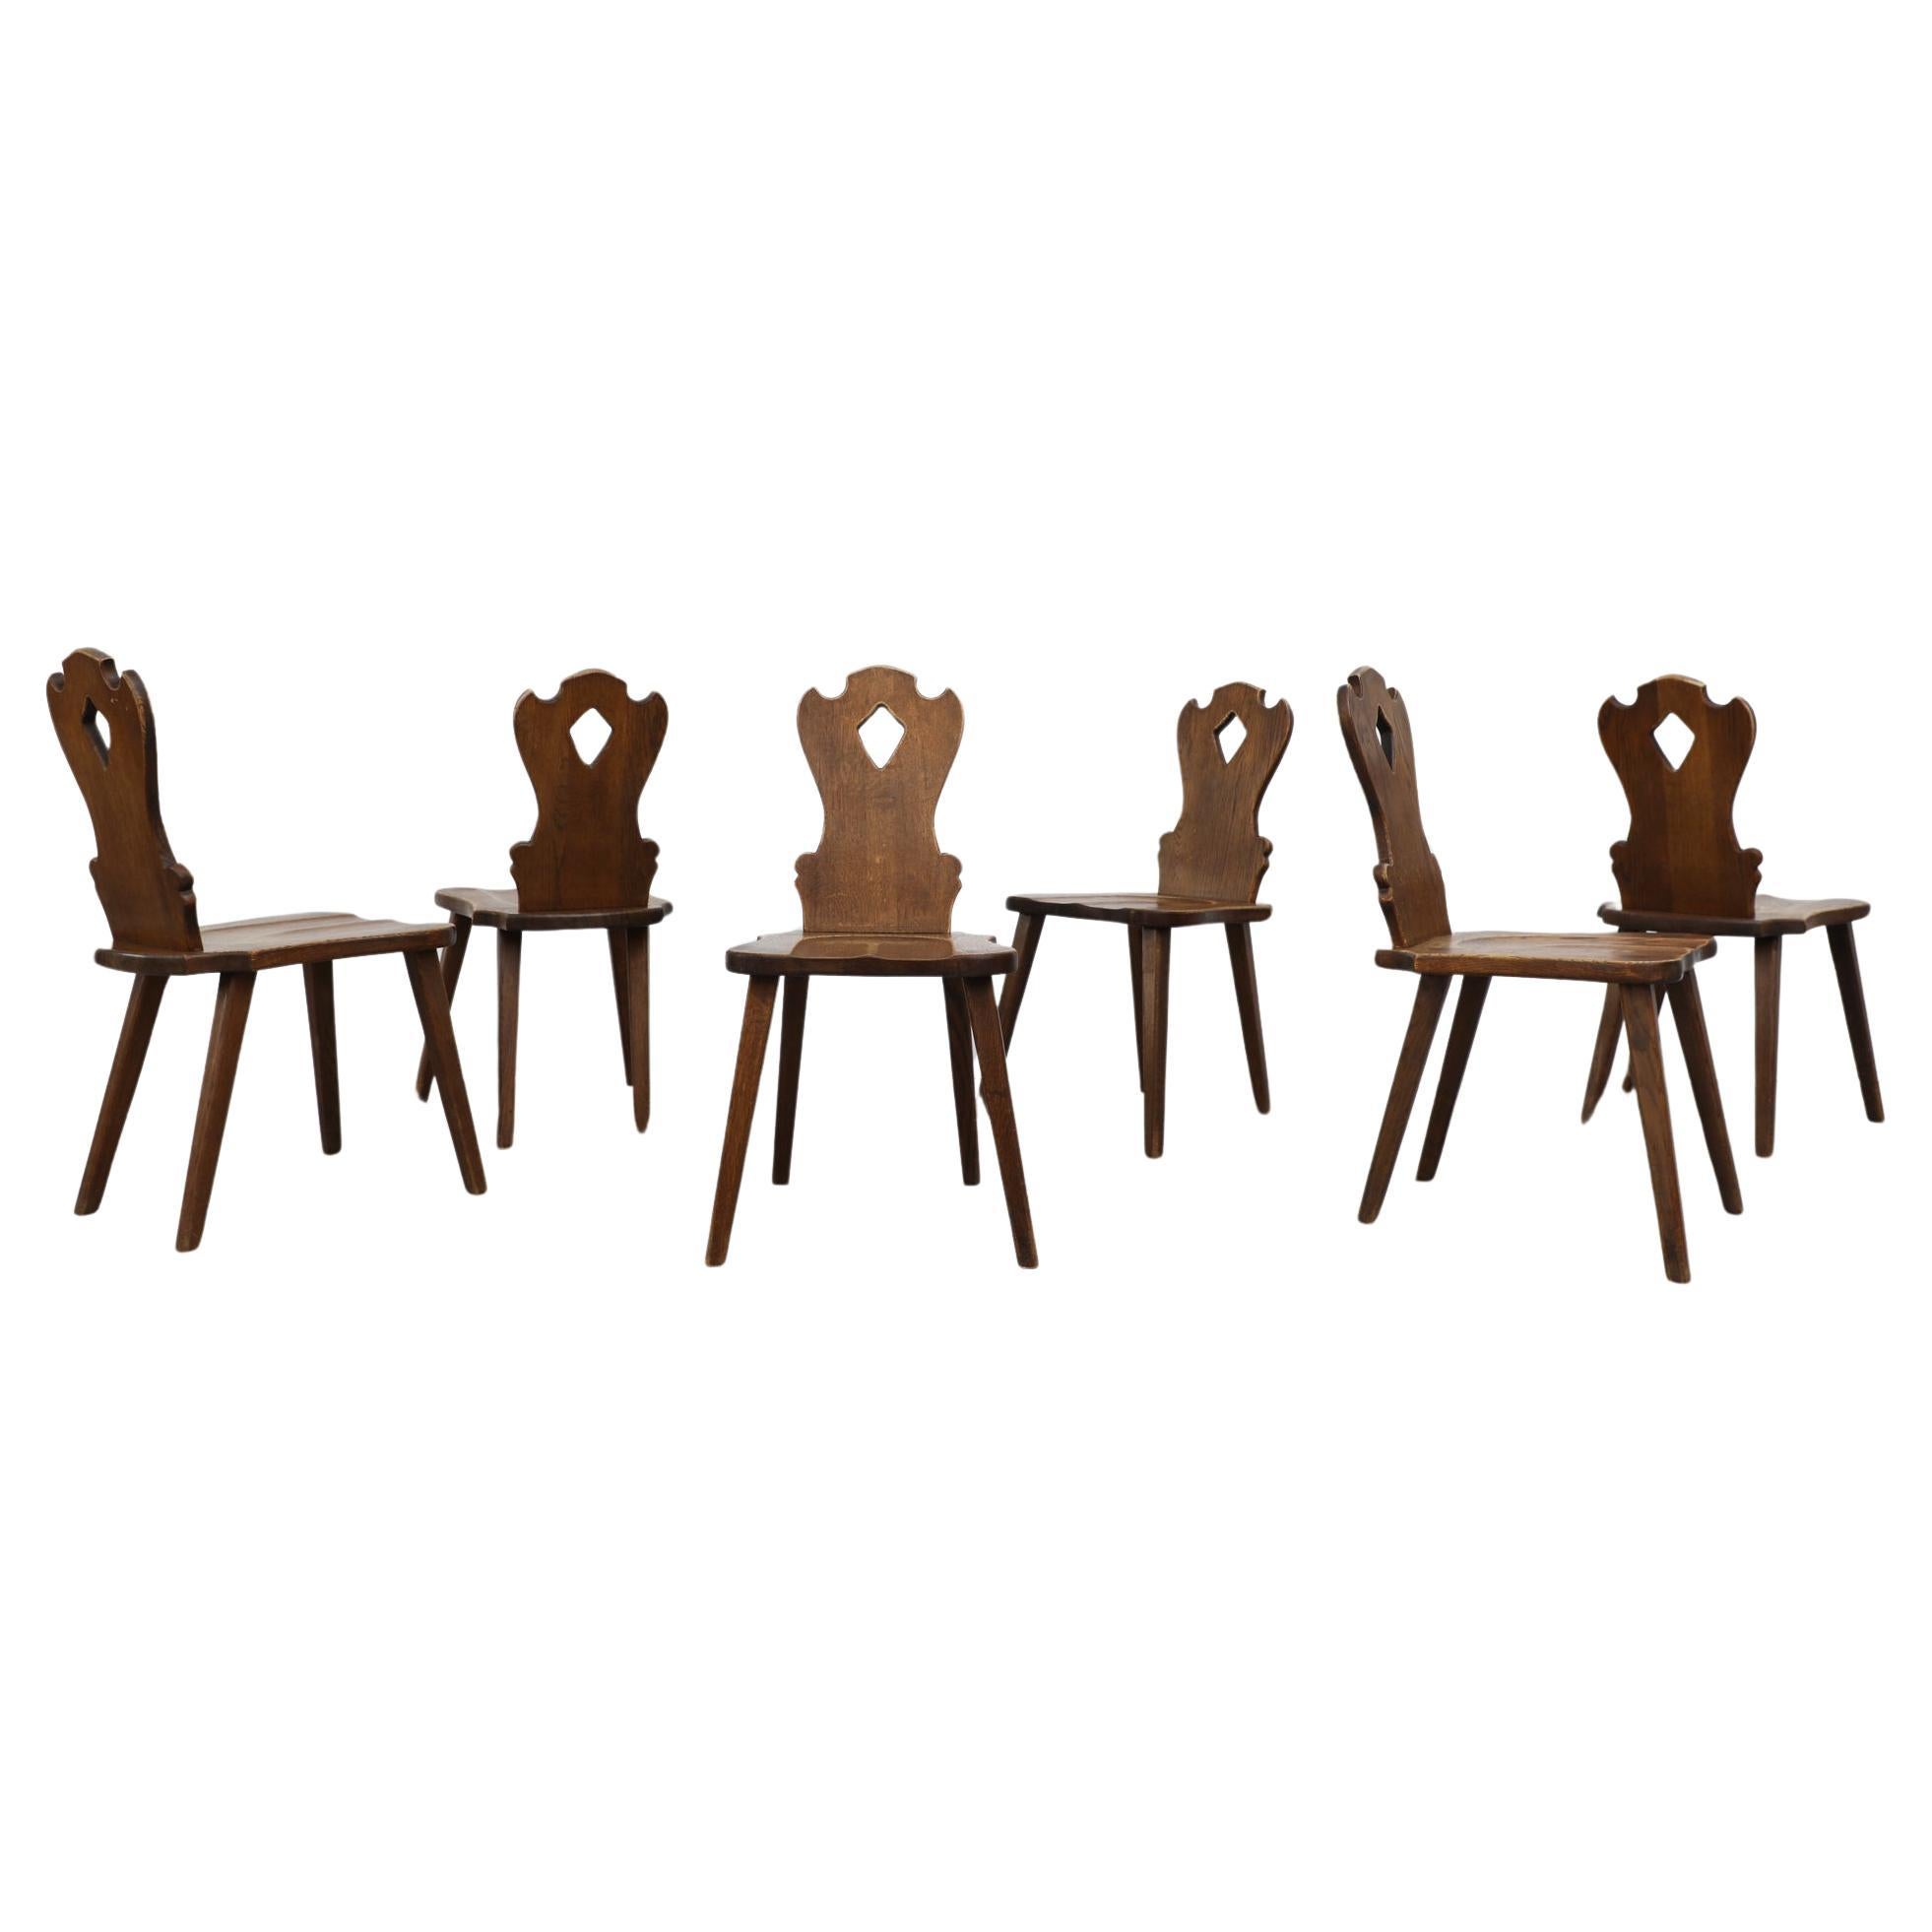 Set of 6 Mid-Century Brutalist Organic Carved Wooden Chairs